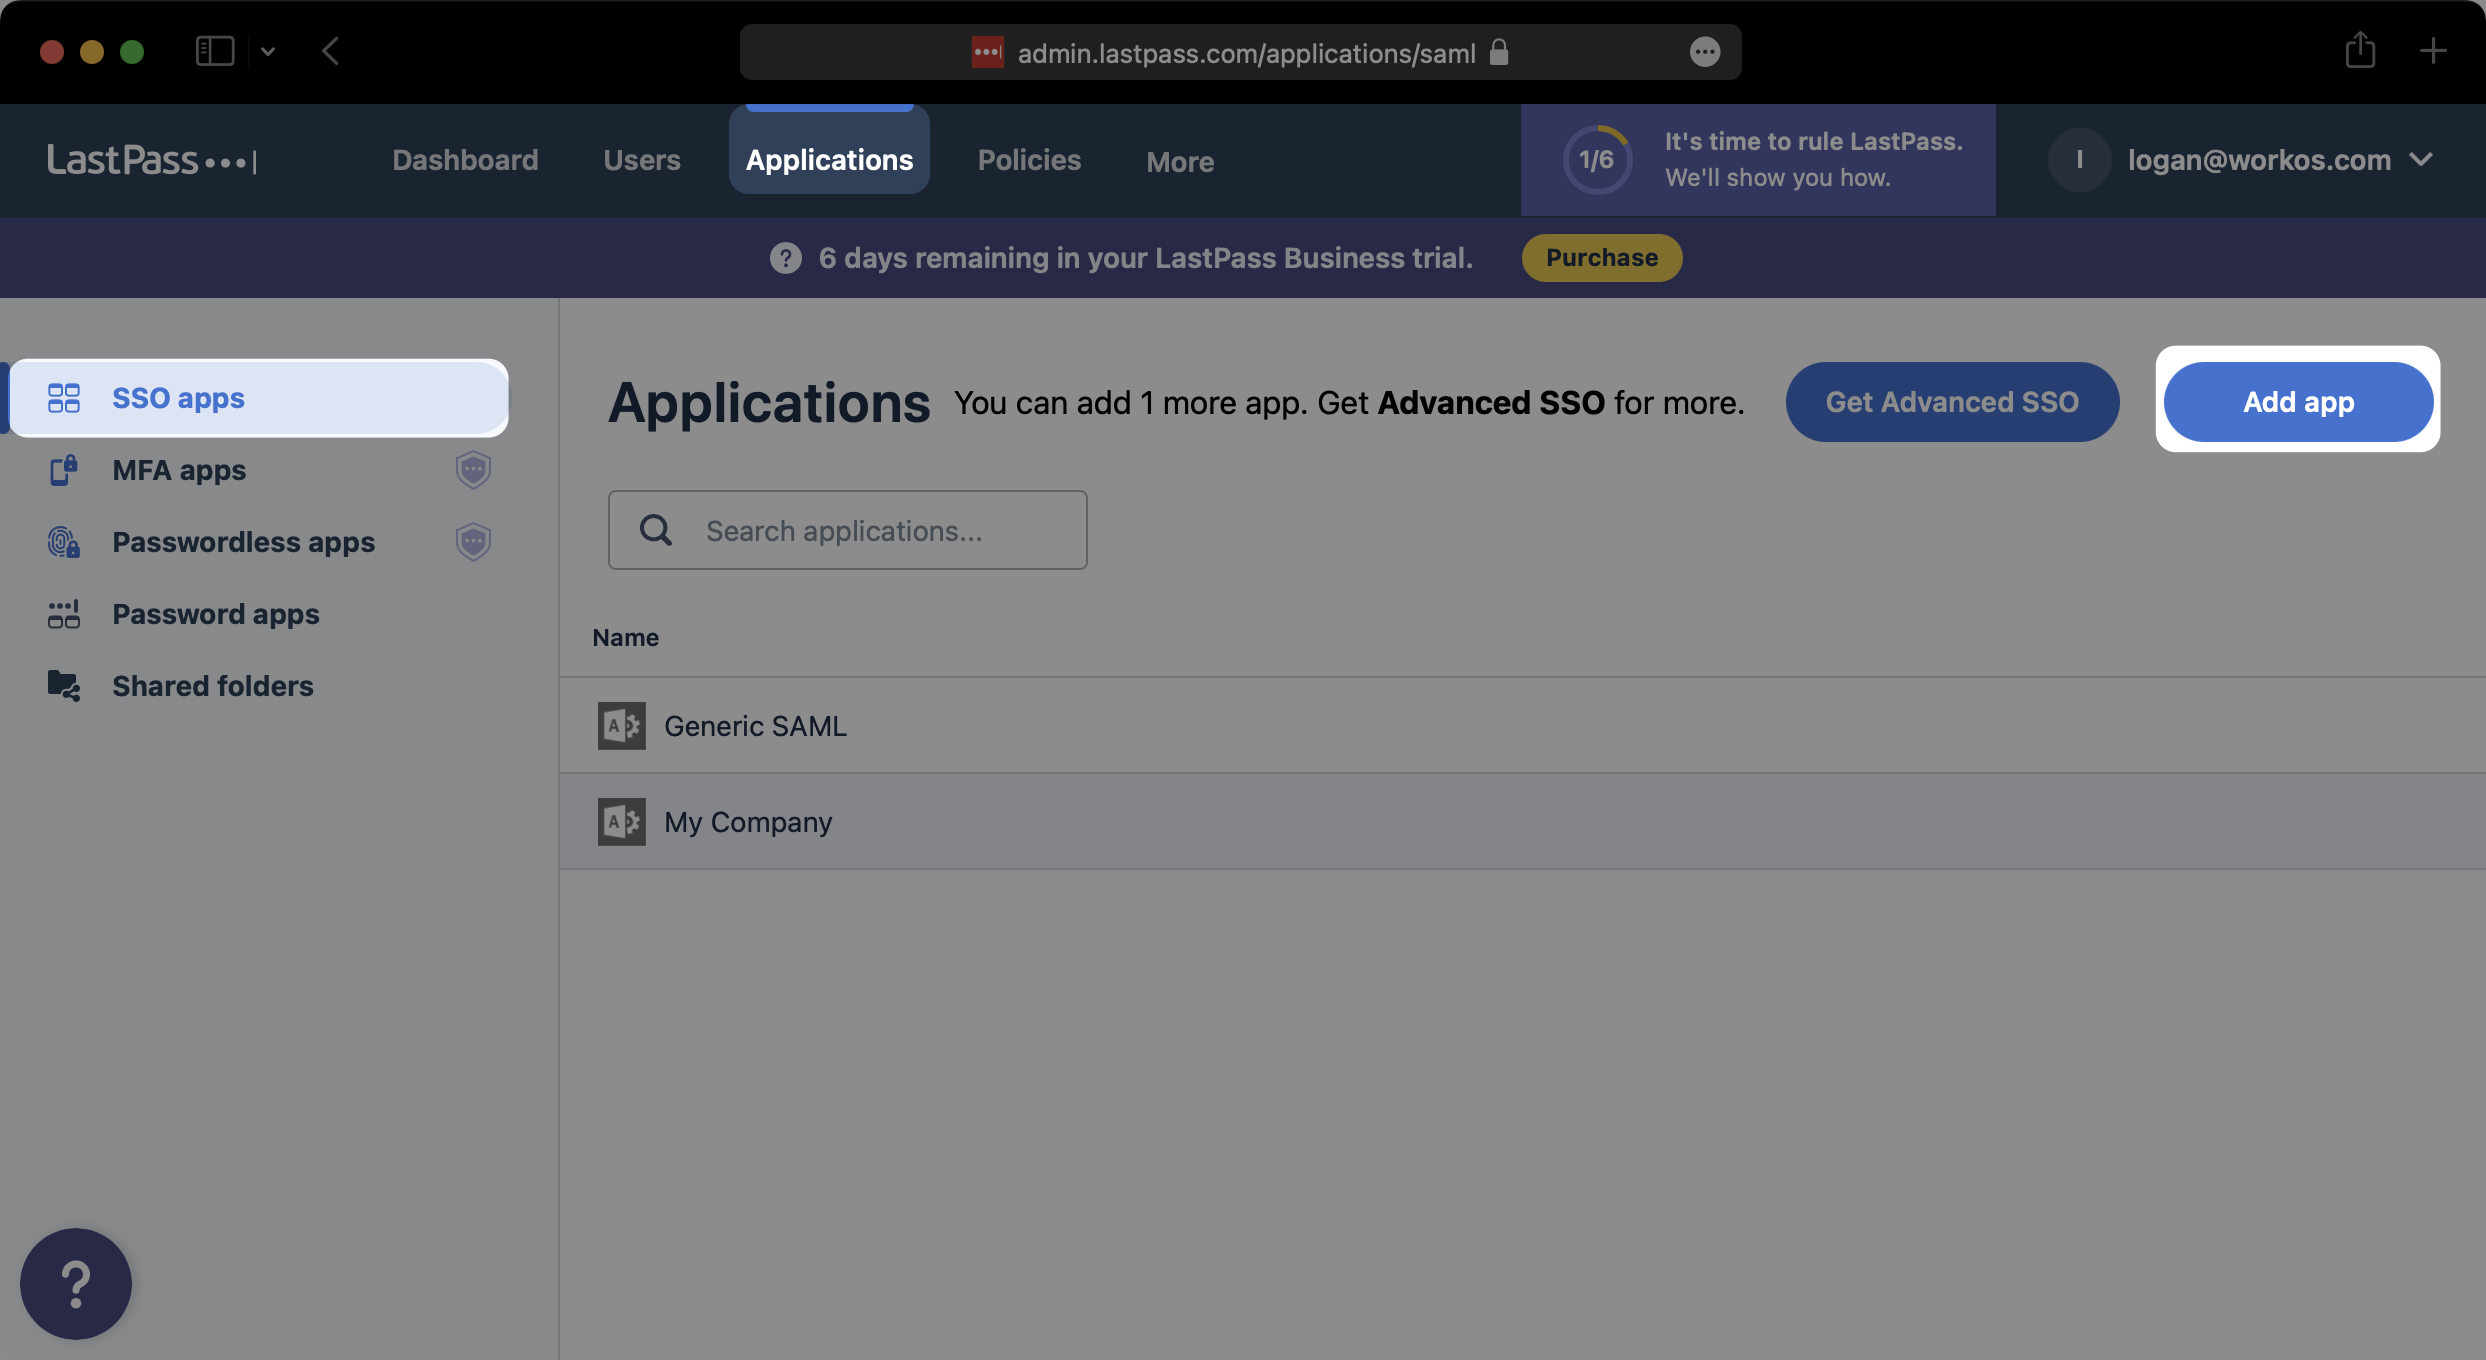 A screenshot showing "Add app" in the "SSO apps" section of the Applications tab in the LastPass admin dashboard.